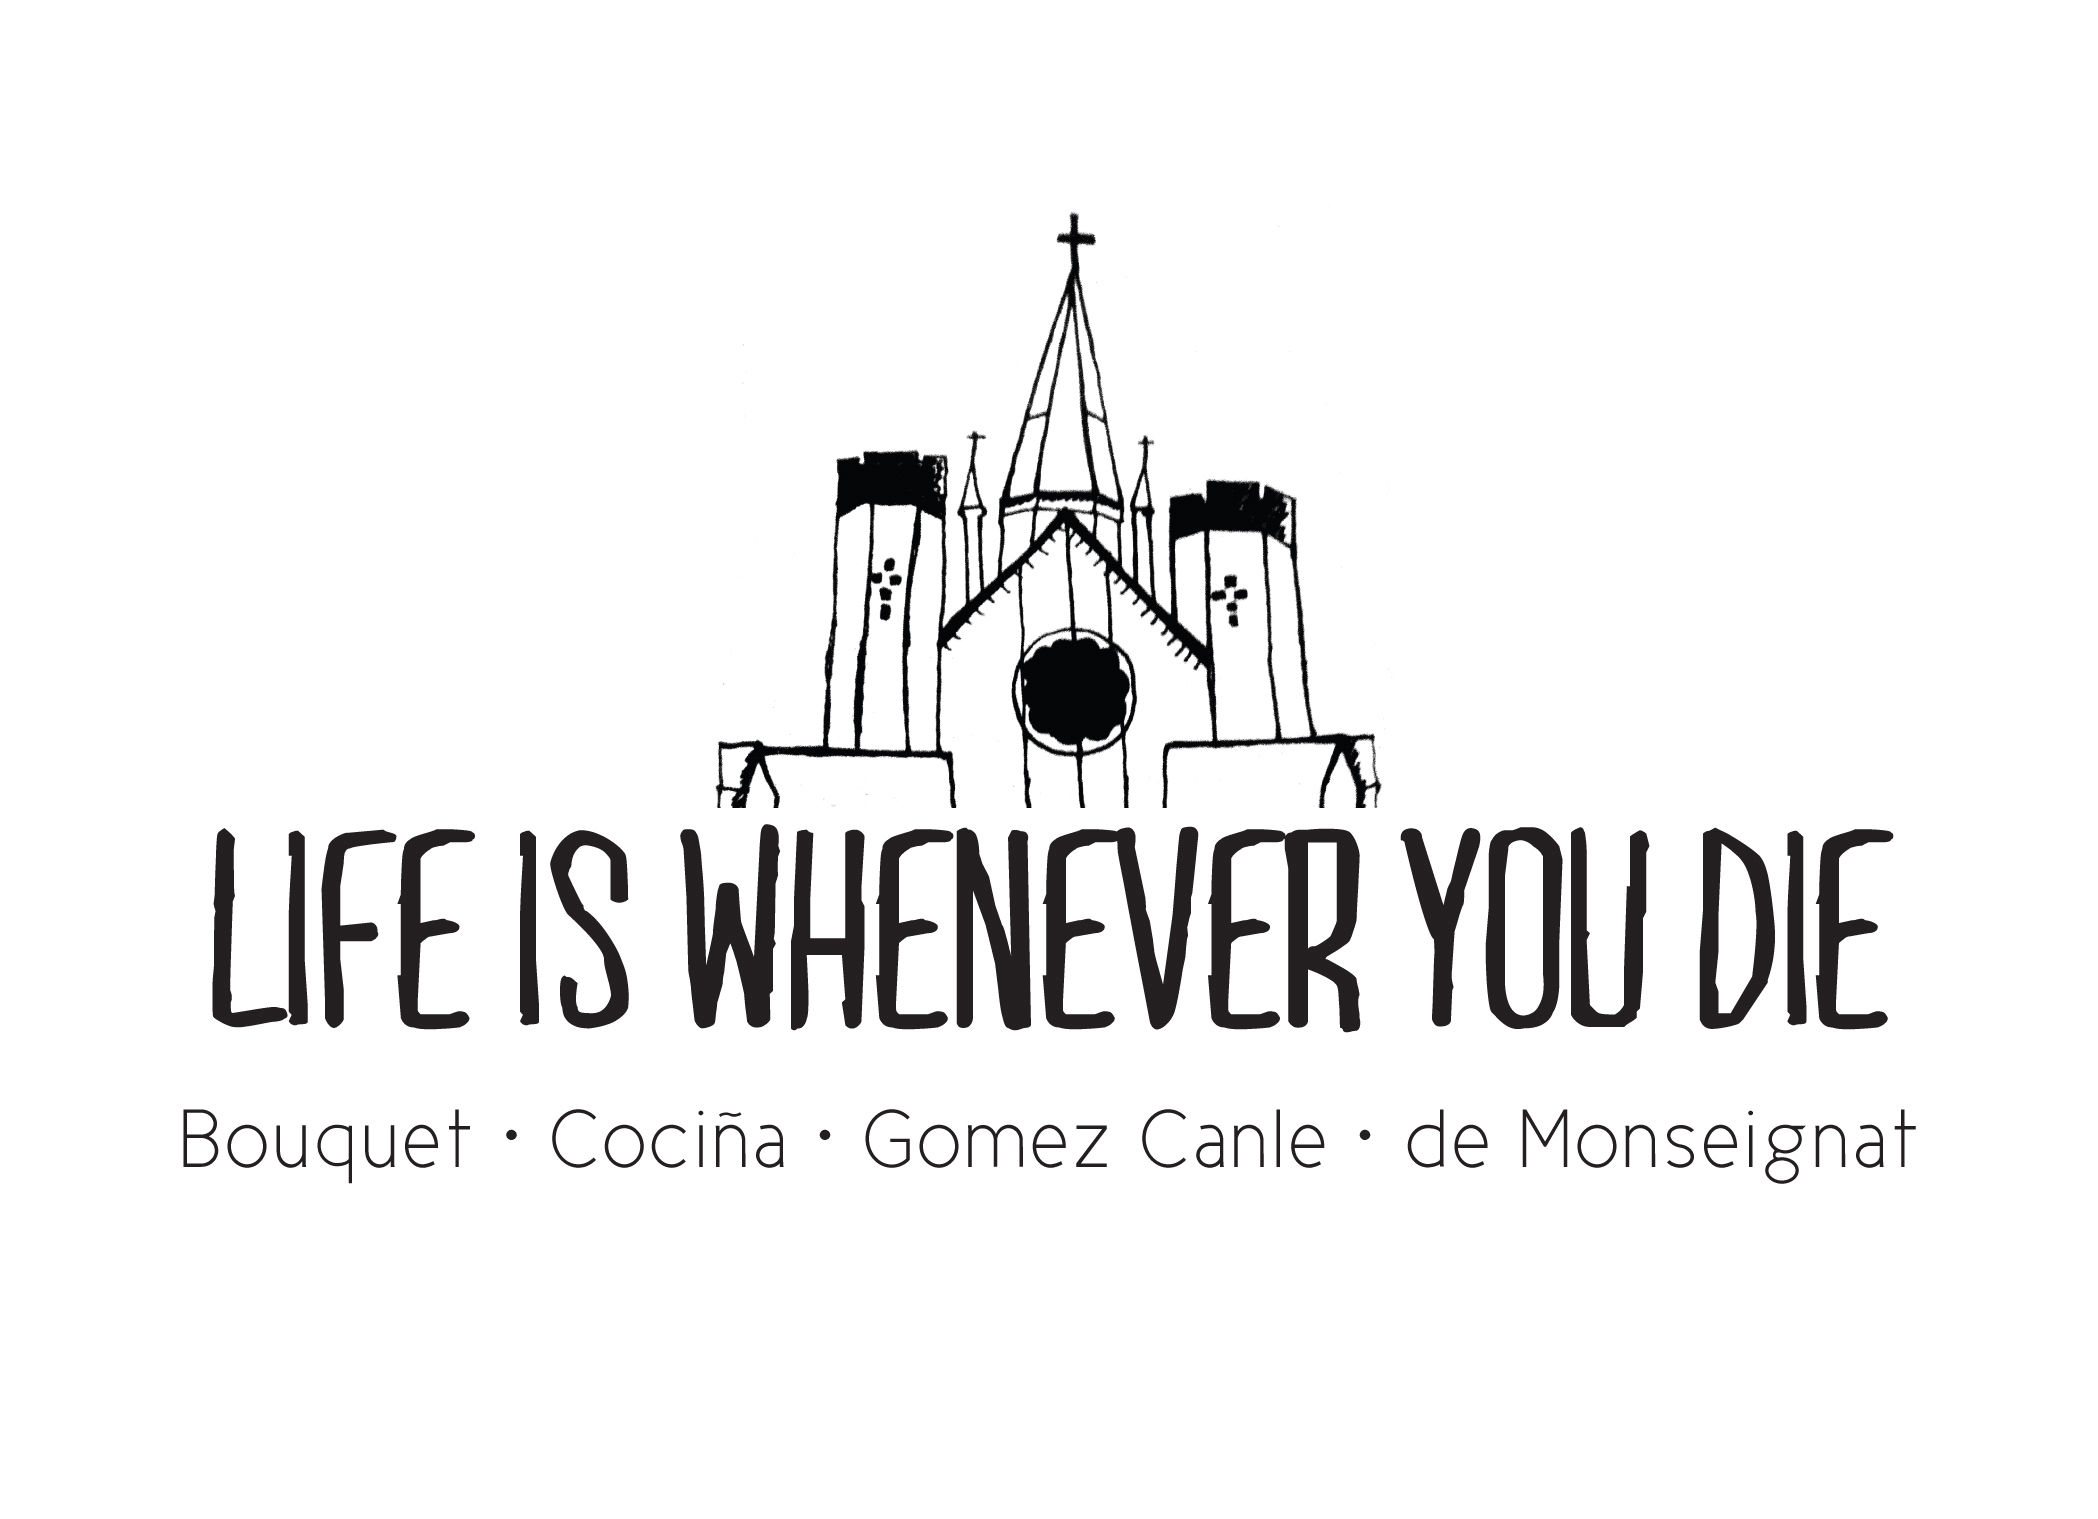 LIFE IS WHENEVER YOU DIE